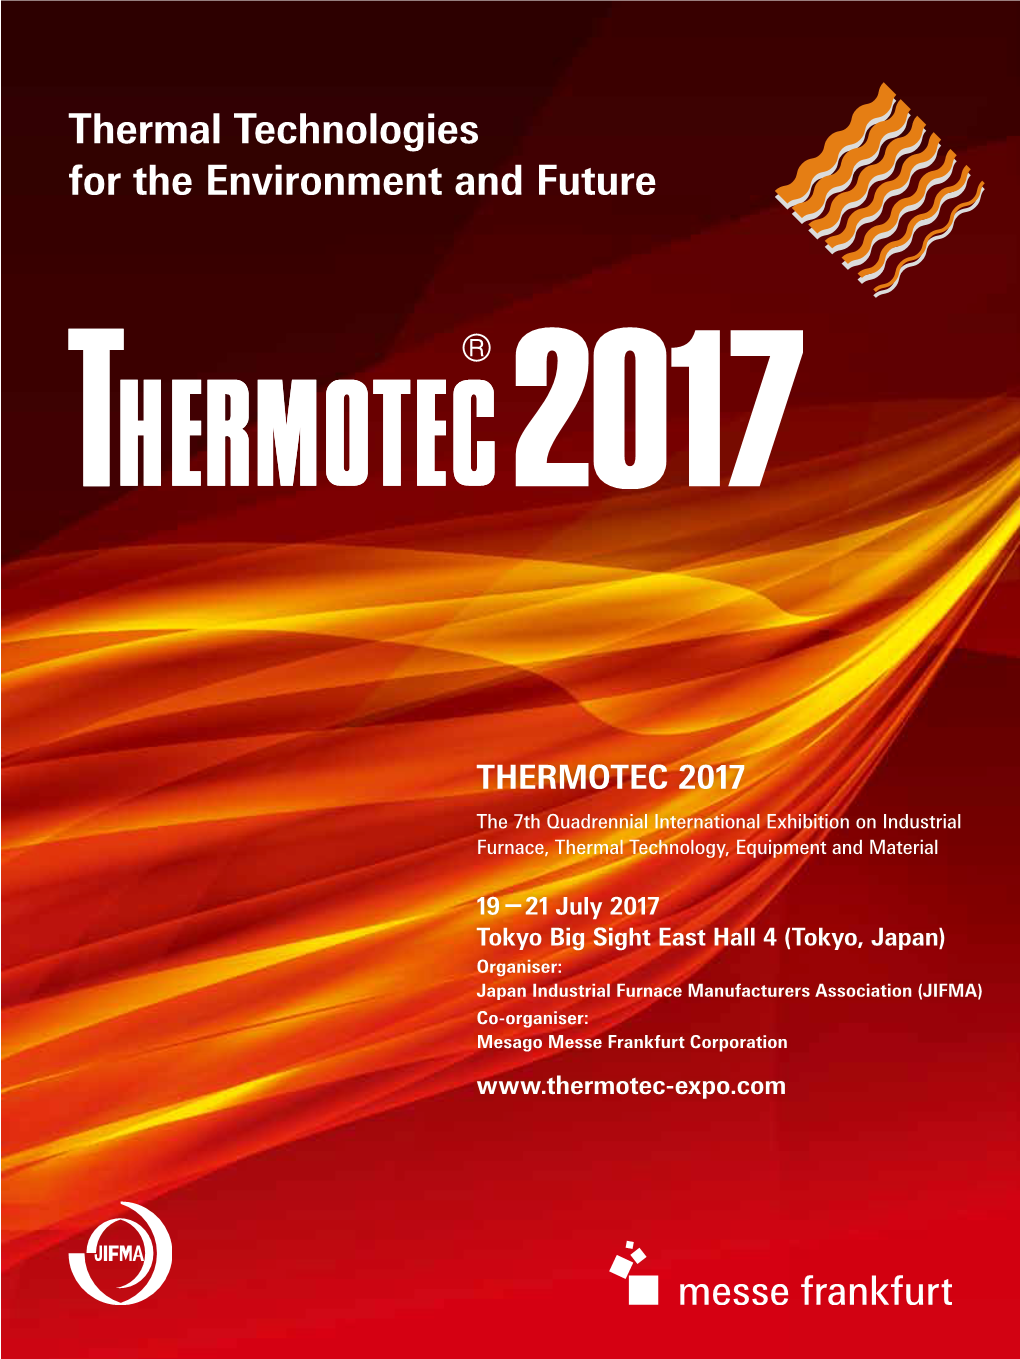 Thermal Technologies for the Environment and Future